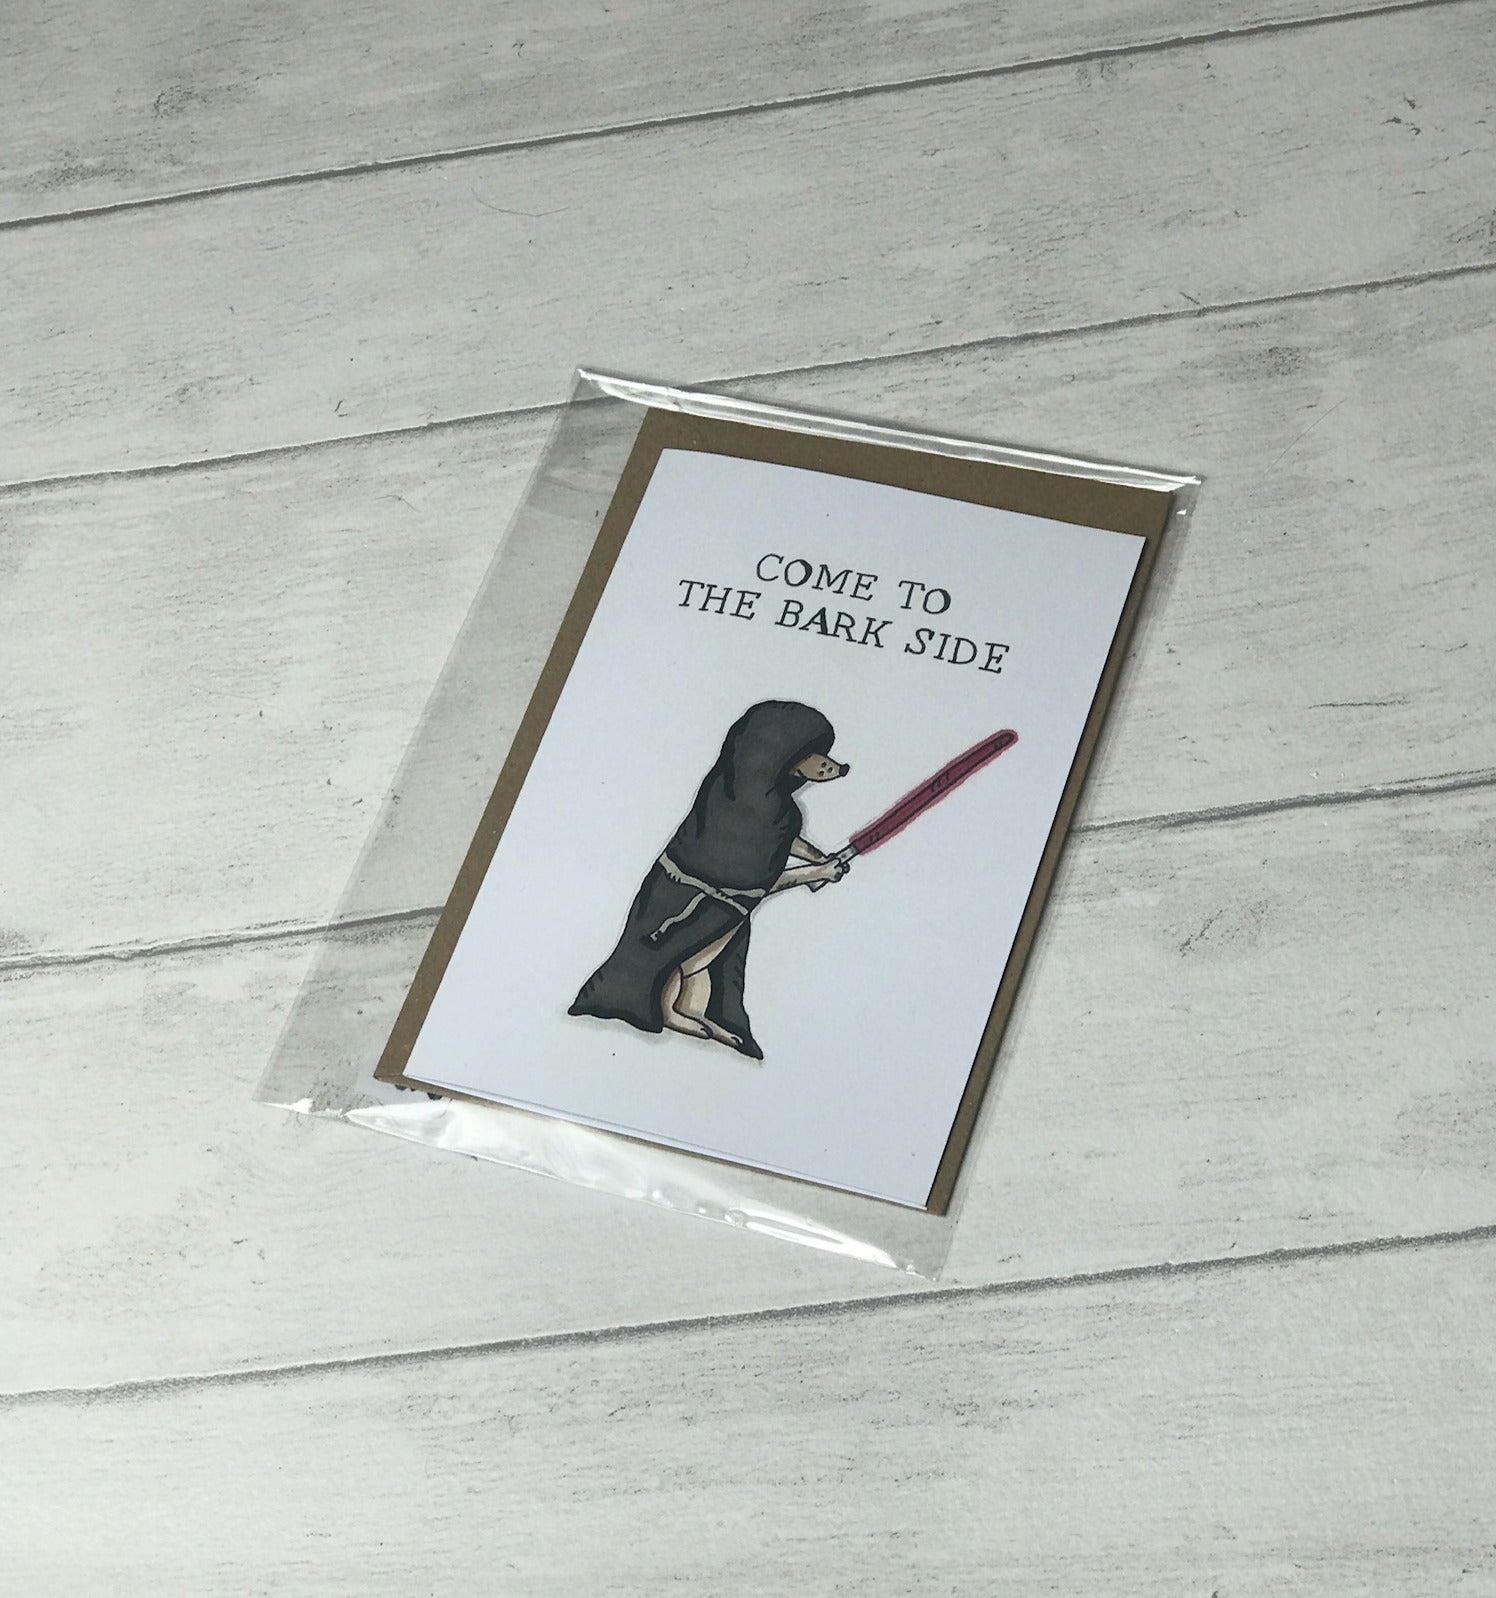 The Curious Whippet Greeting Cards